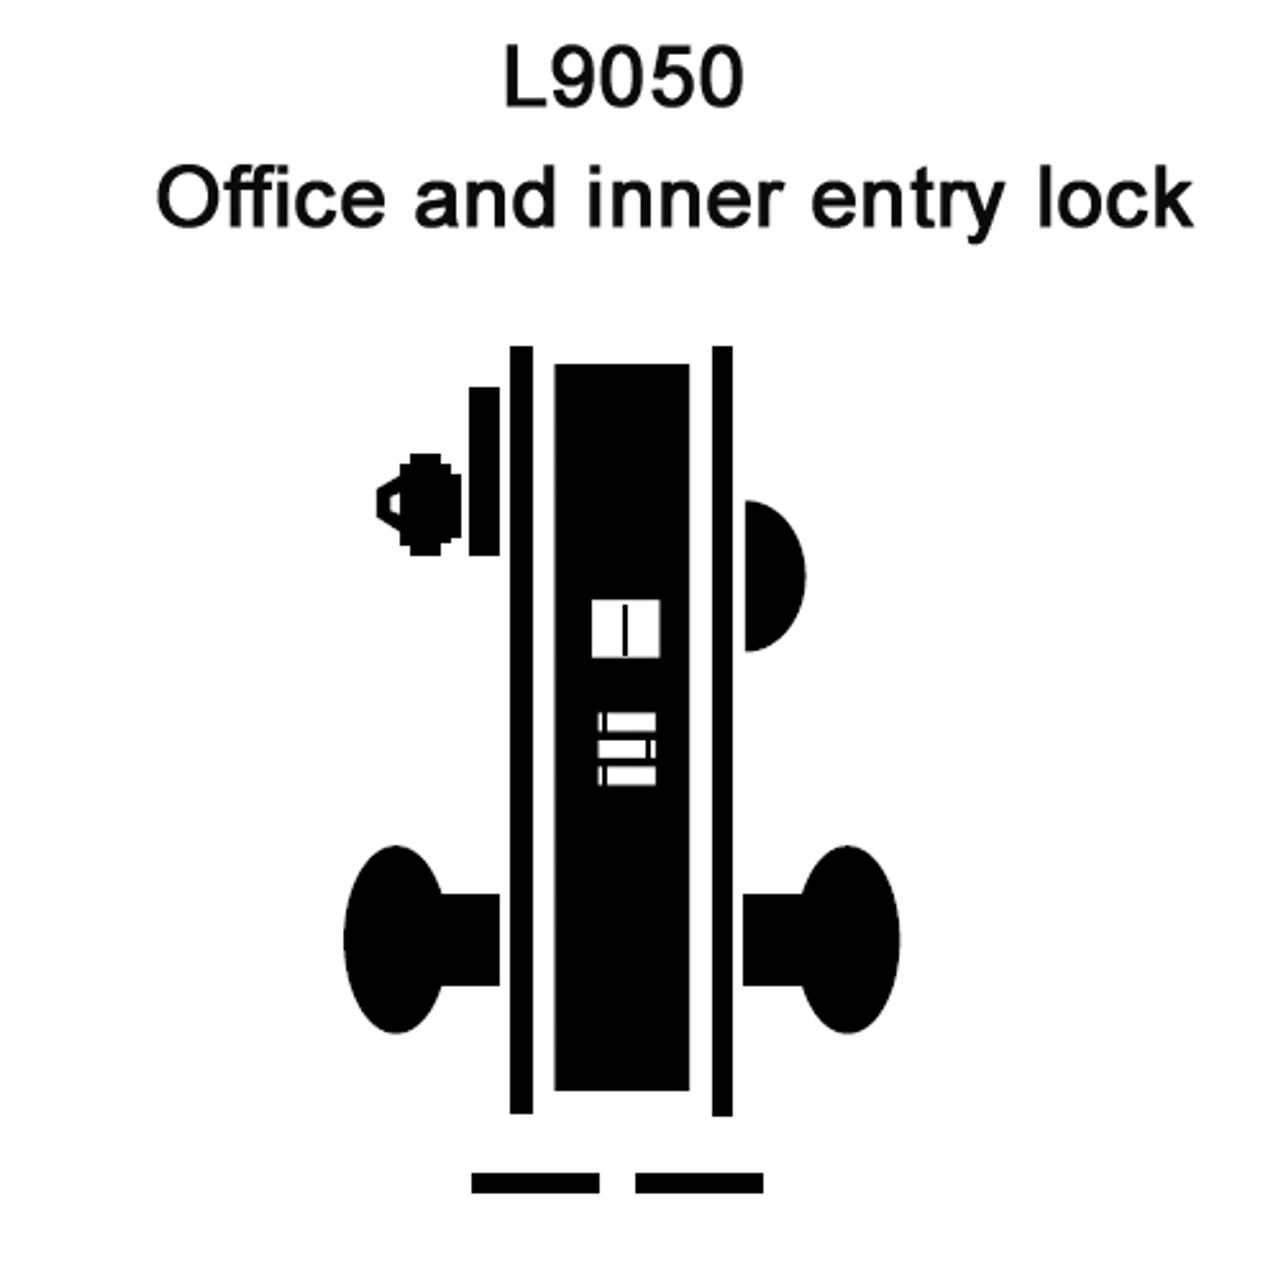 L9050L-02A-625 Schlage L Series Less Cylinder Entrance Commercial Mortise Lock with 02 Cast Lever Design in Bright Chrome